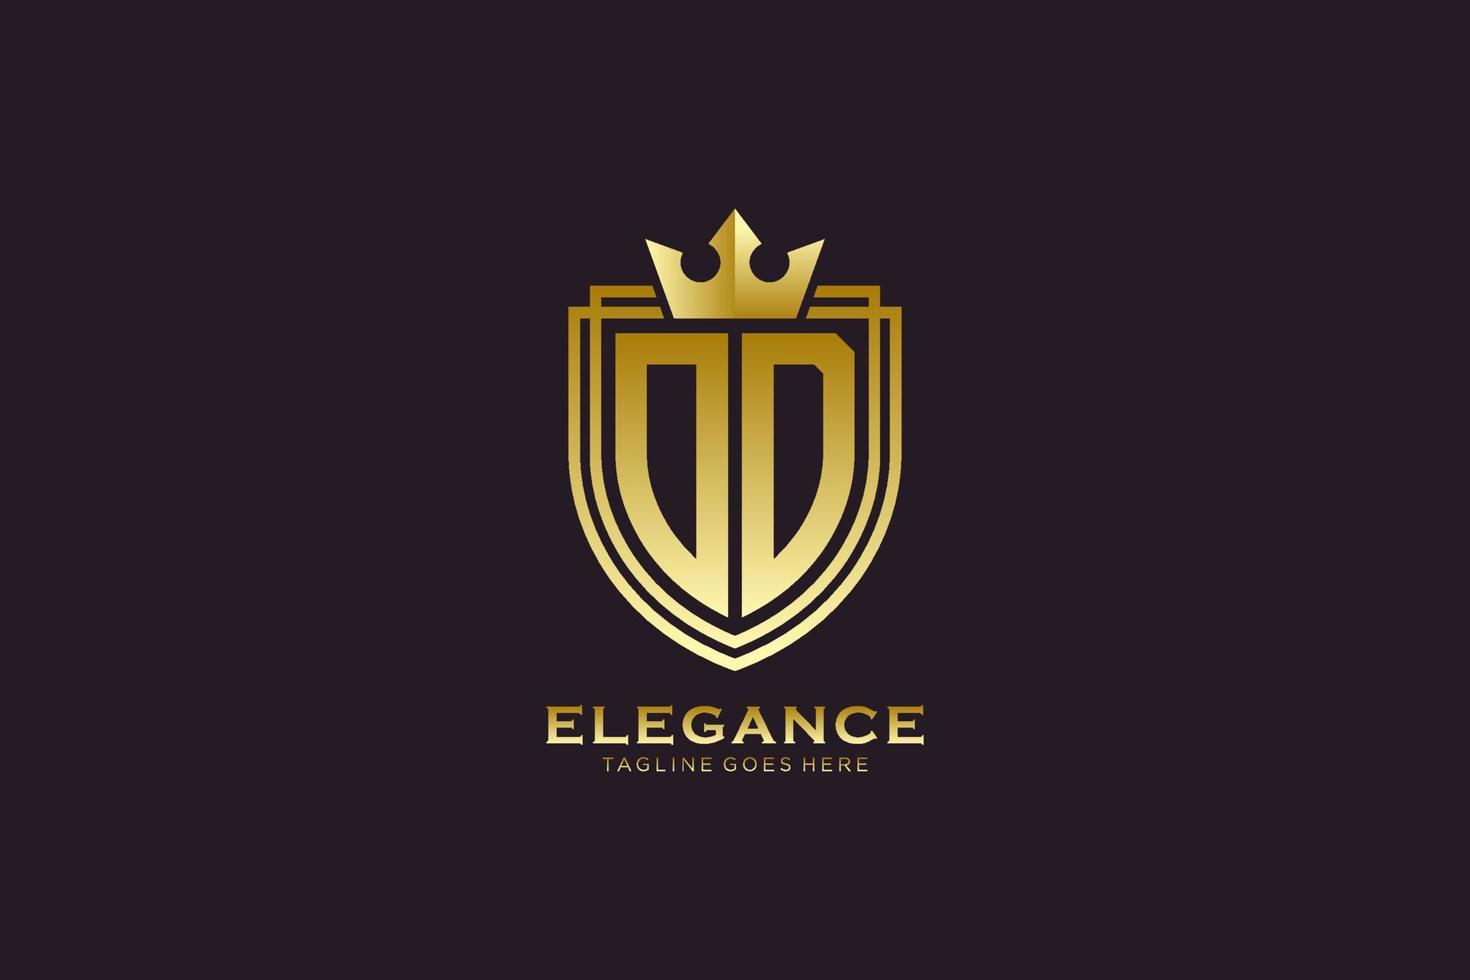 initial OD elegant luxury monogram logo or badge template with scrolls and royal crown - perfect for luxurious branding projects vector